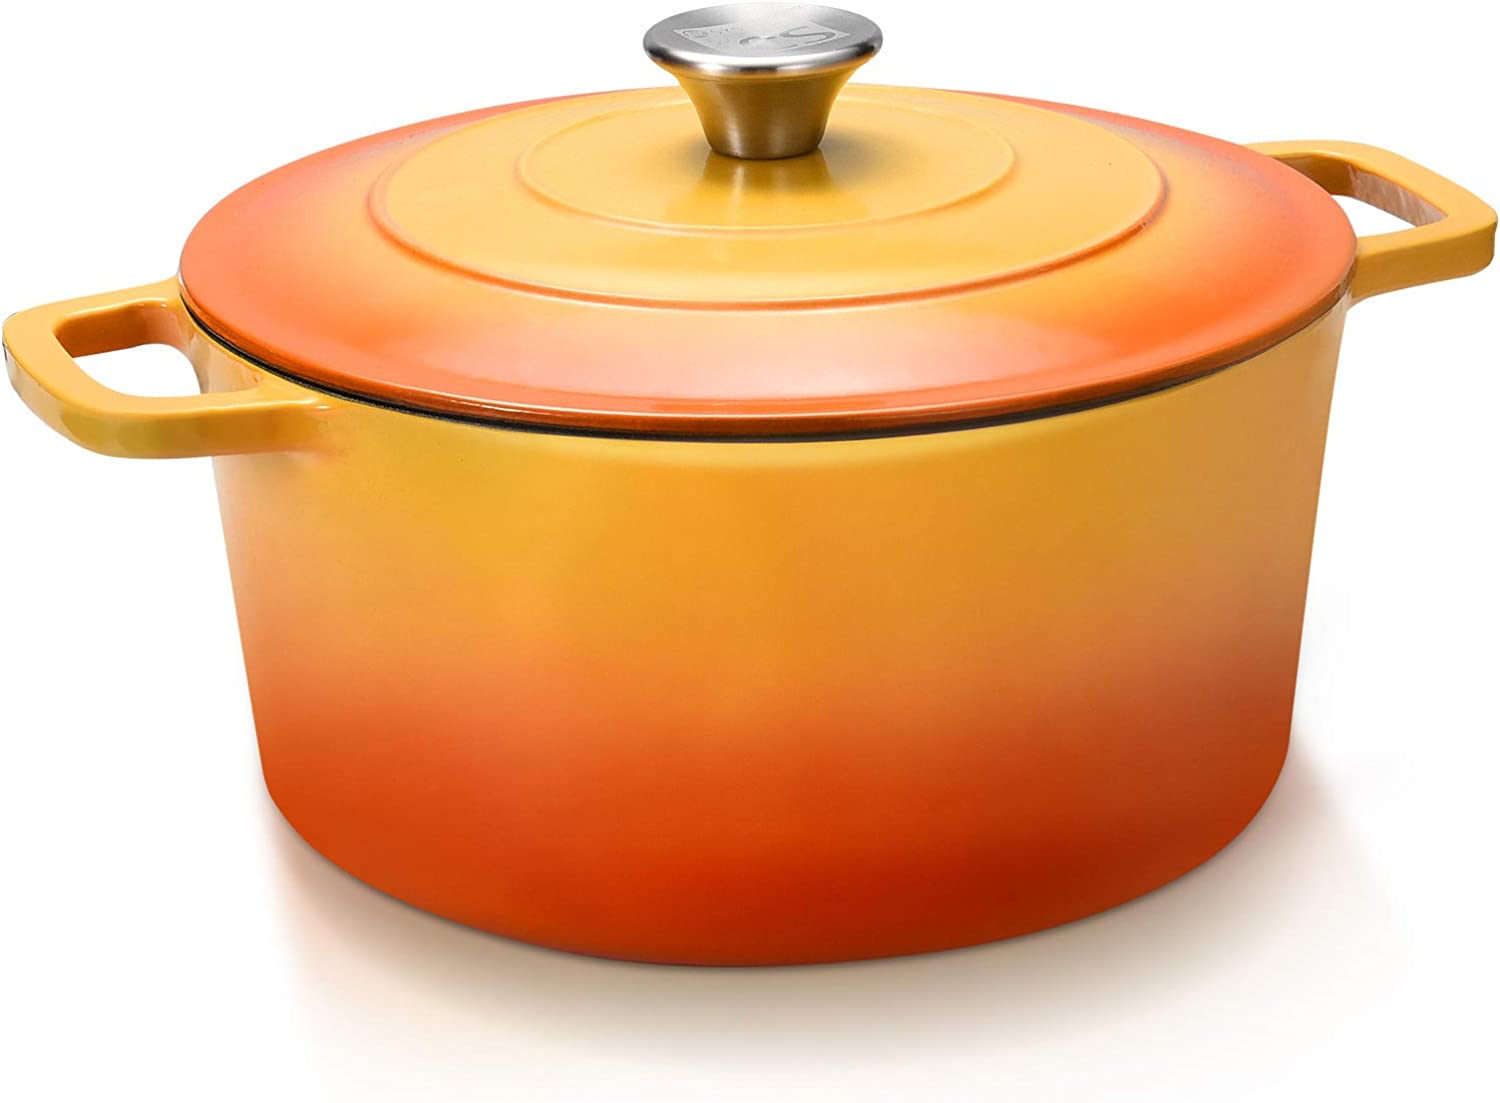 CSK Cast Iron Dutch Oven -  - Cast Iron Round Pot with Nonstick Enameled Coating